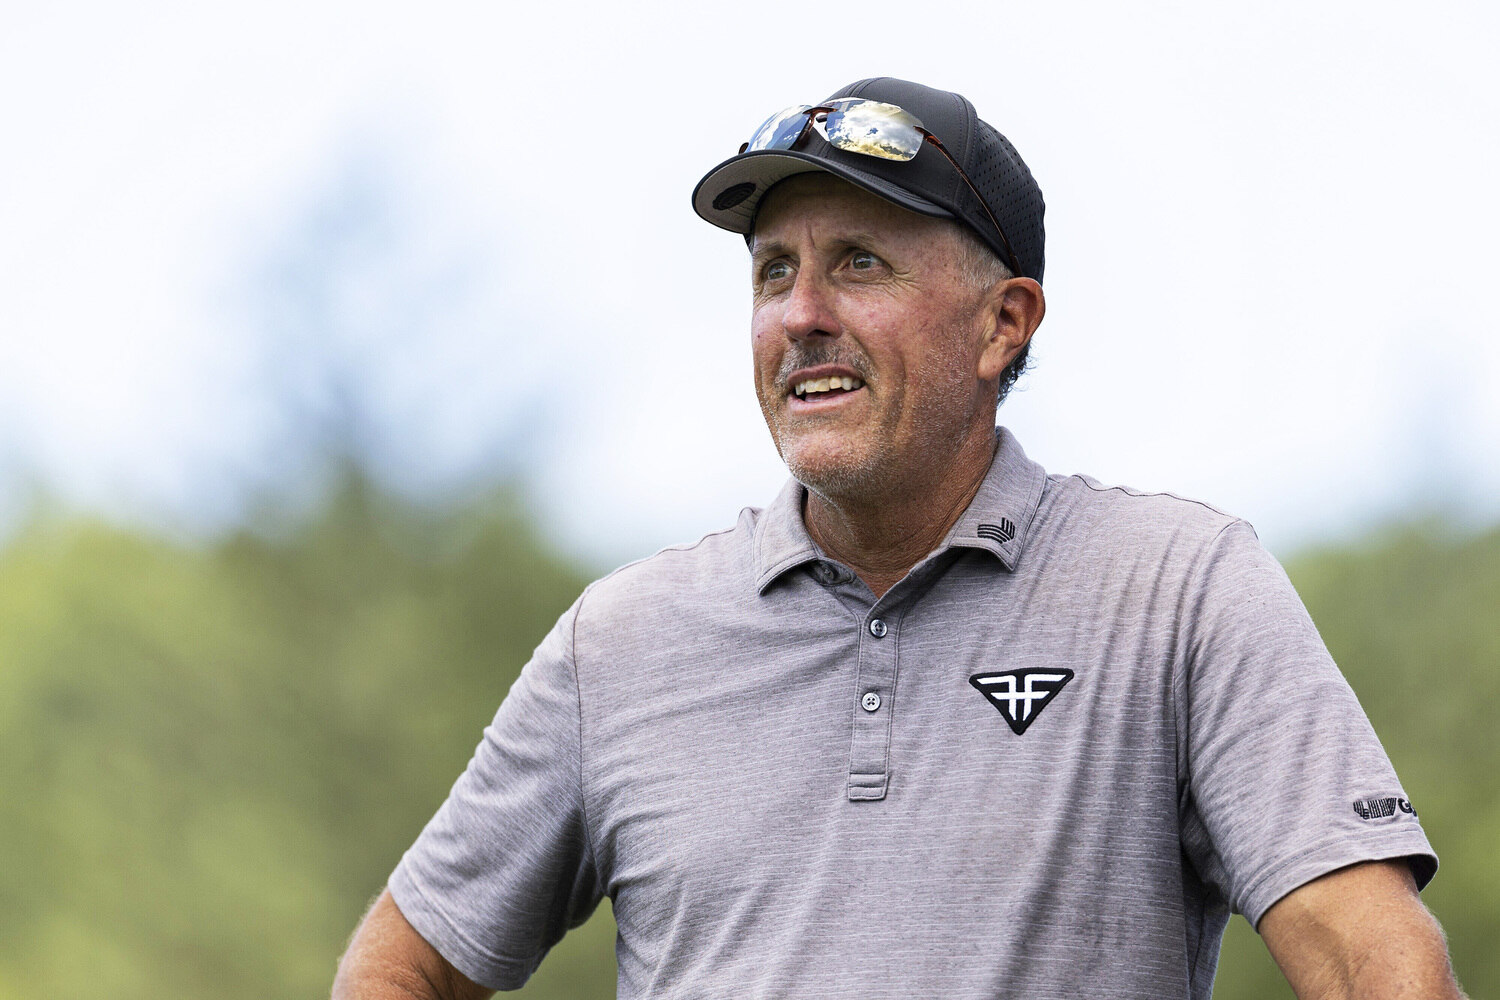 phil-mickelson-opens-up-about-his-battle-with-gambling-addiction-and-journey-to-recovery